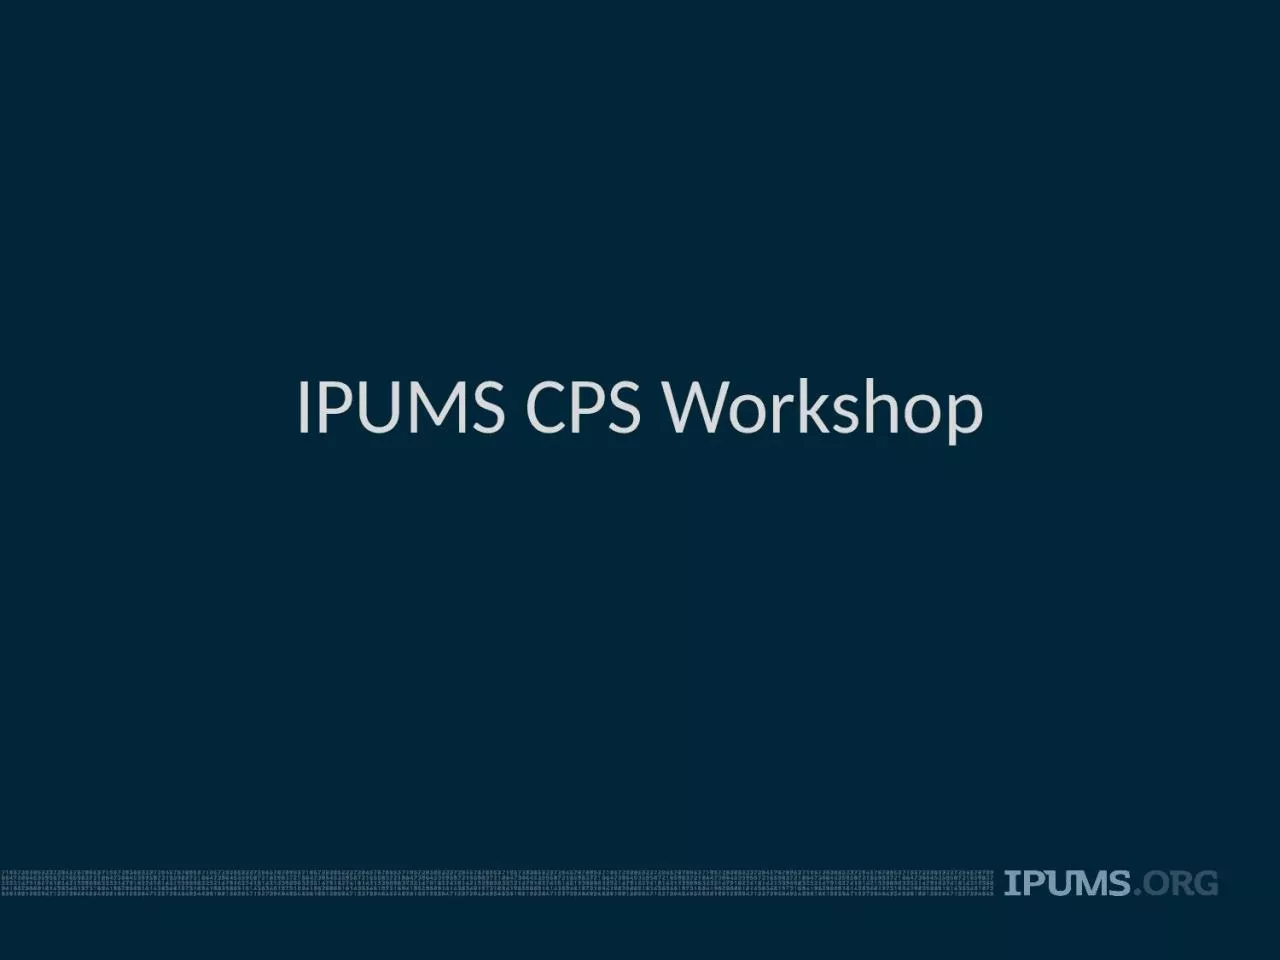 IPUMS CPS Workshop WELCOME!